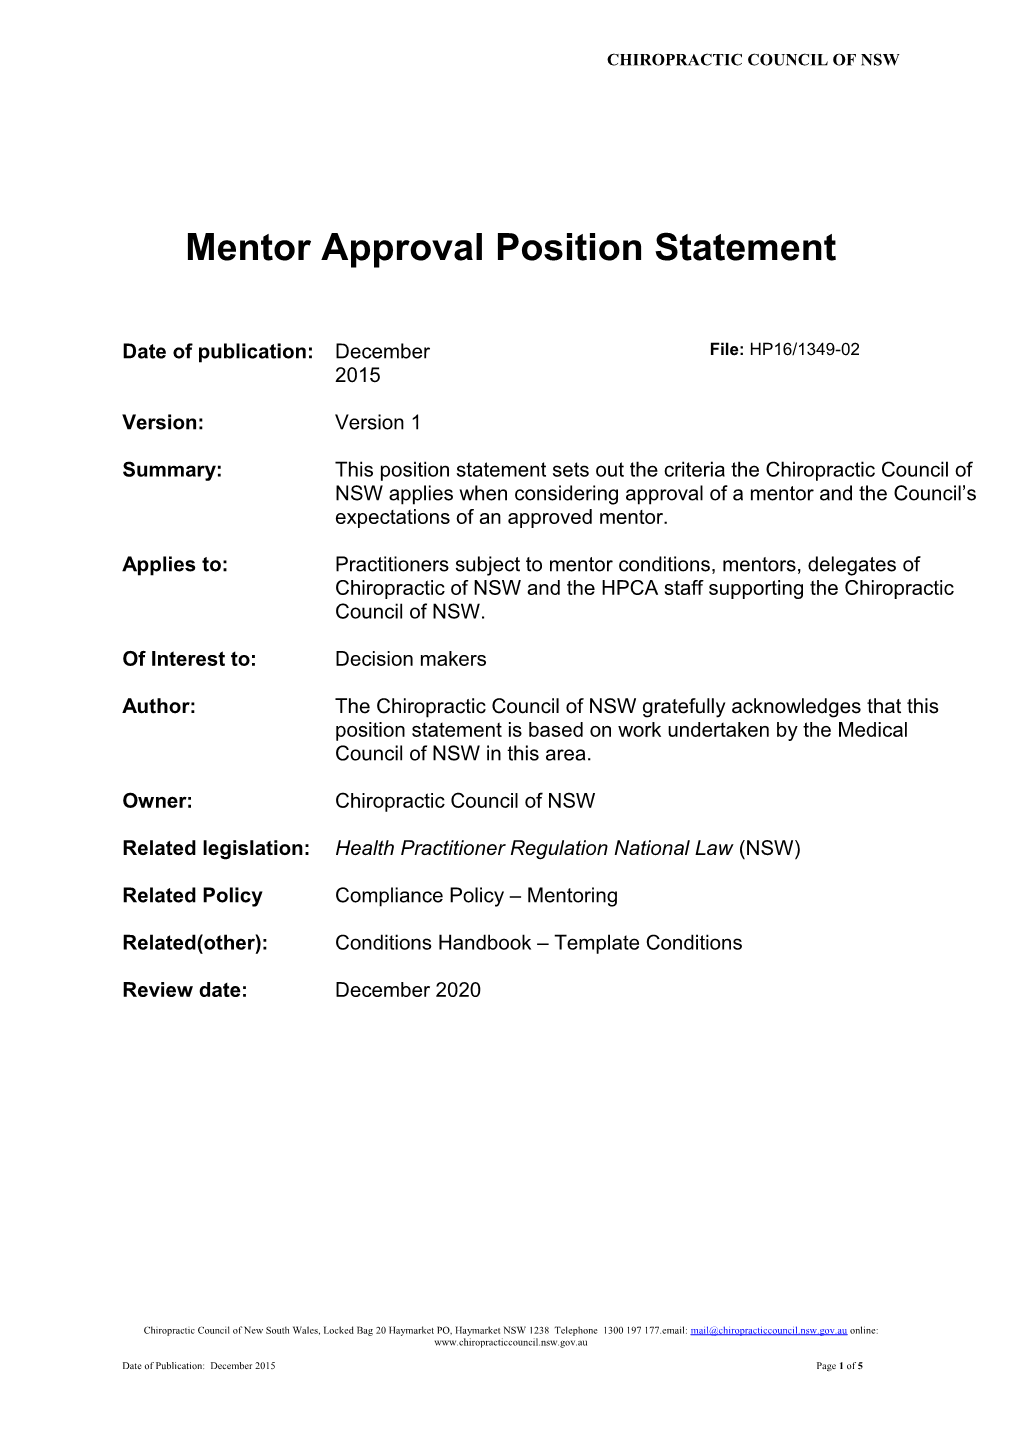 Mentor Approval Position Statement